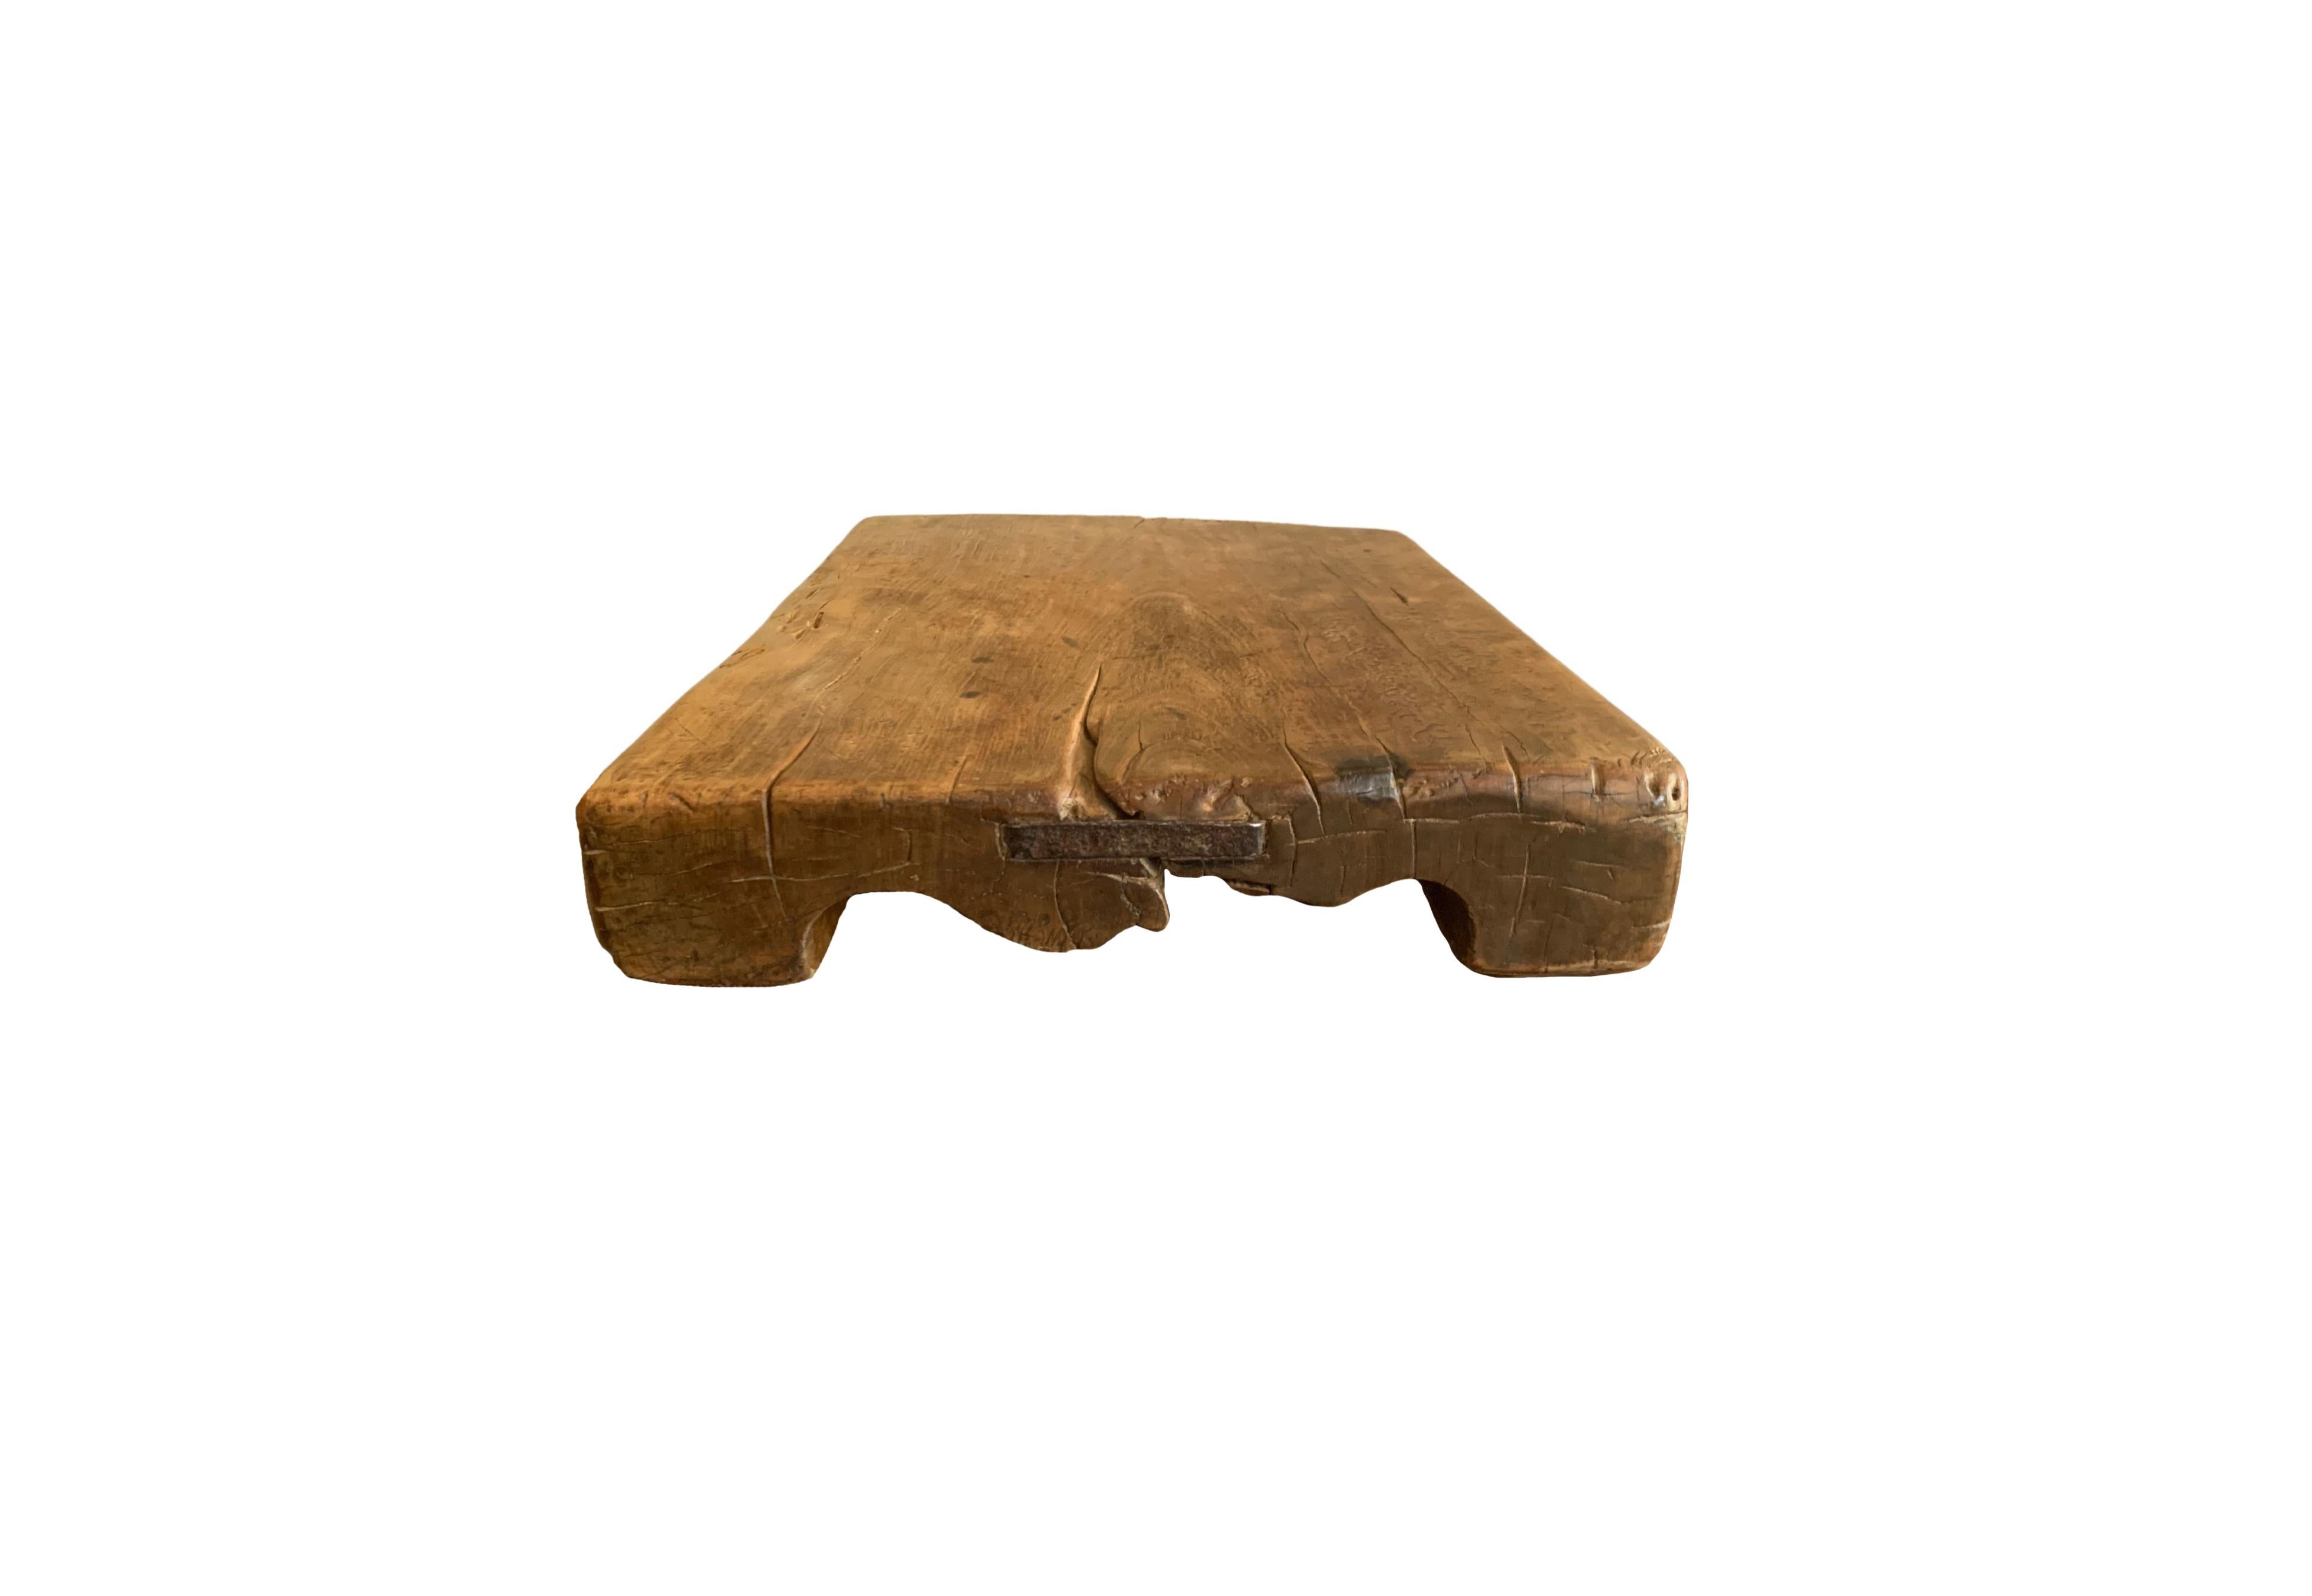 Qing Antique Chinese Wooden Block / Chopping Block, Hand-Carved, c. 1900 For Sale